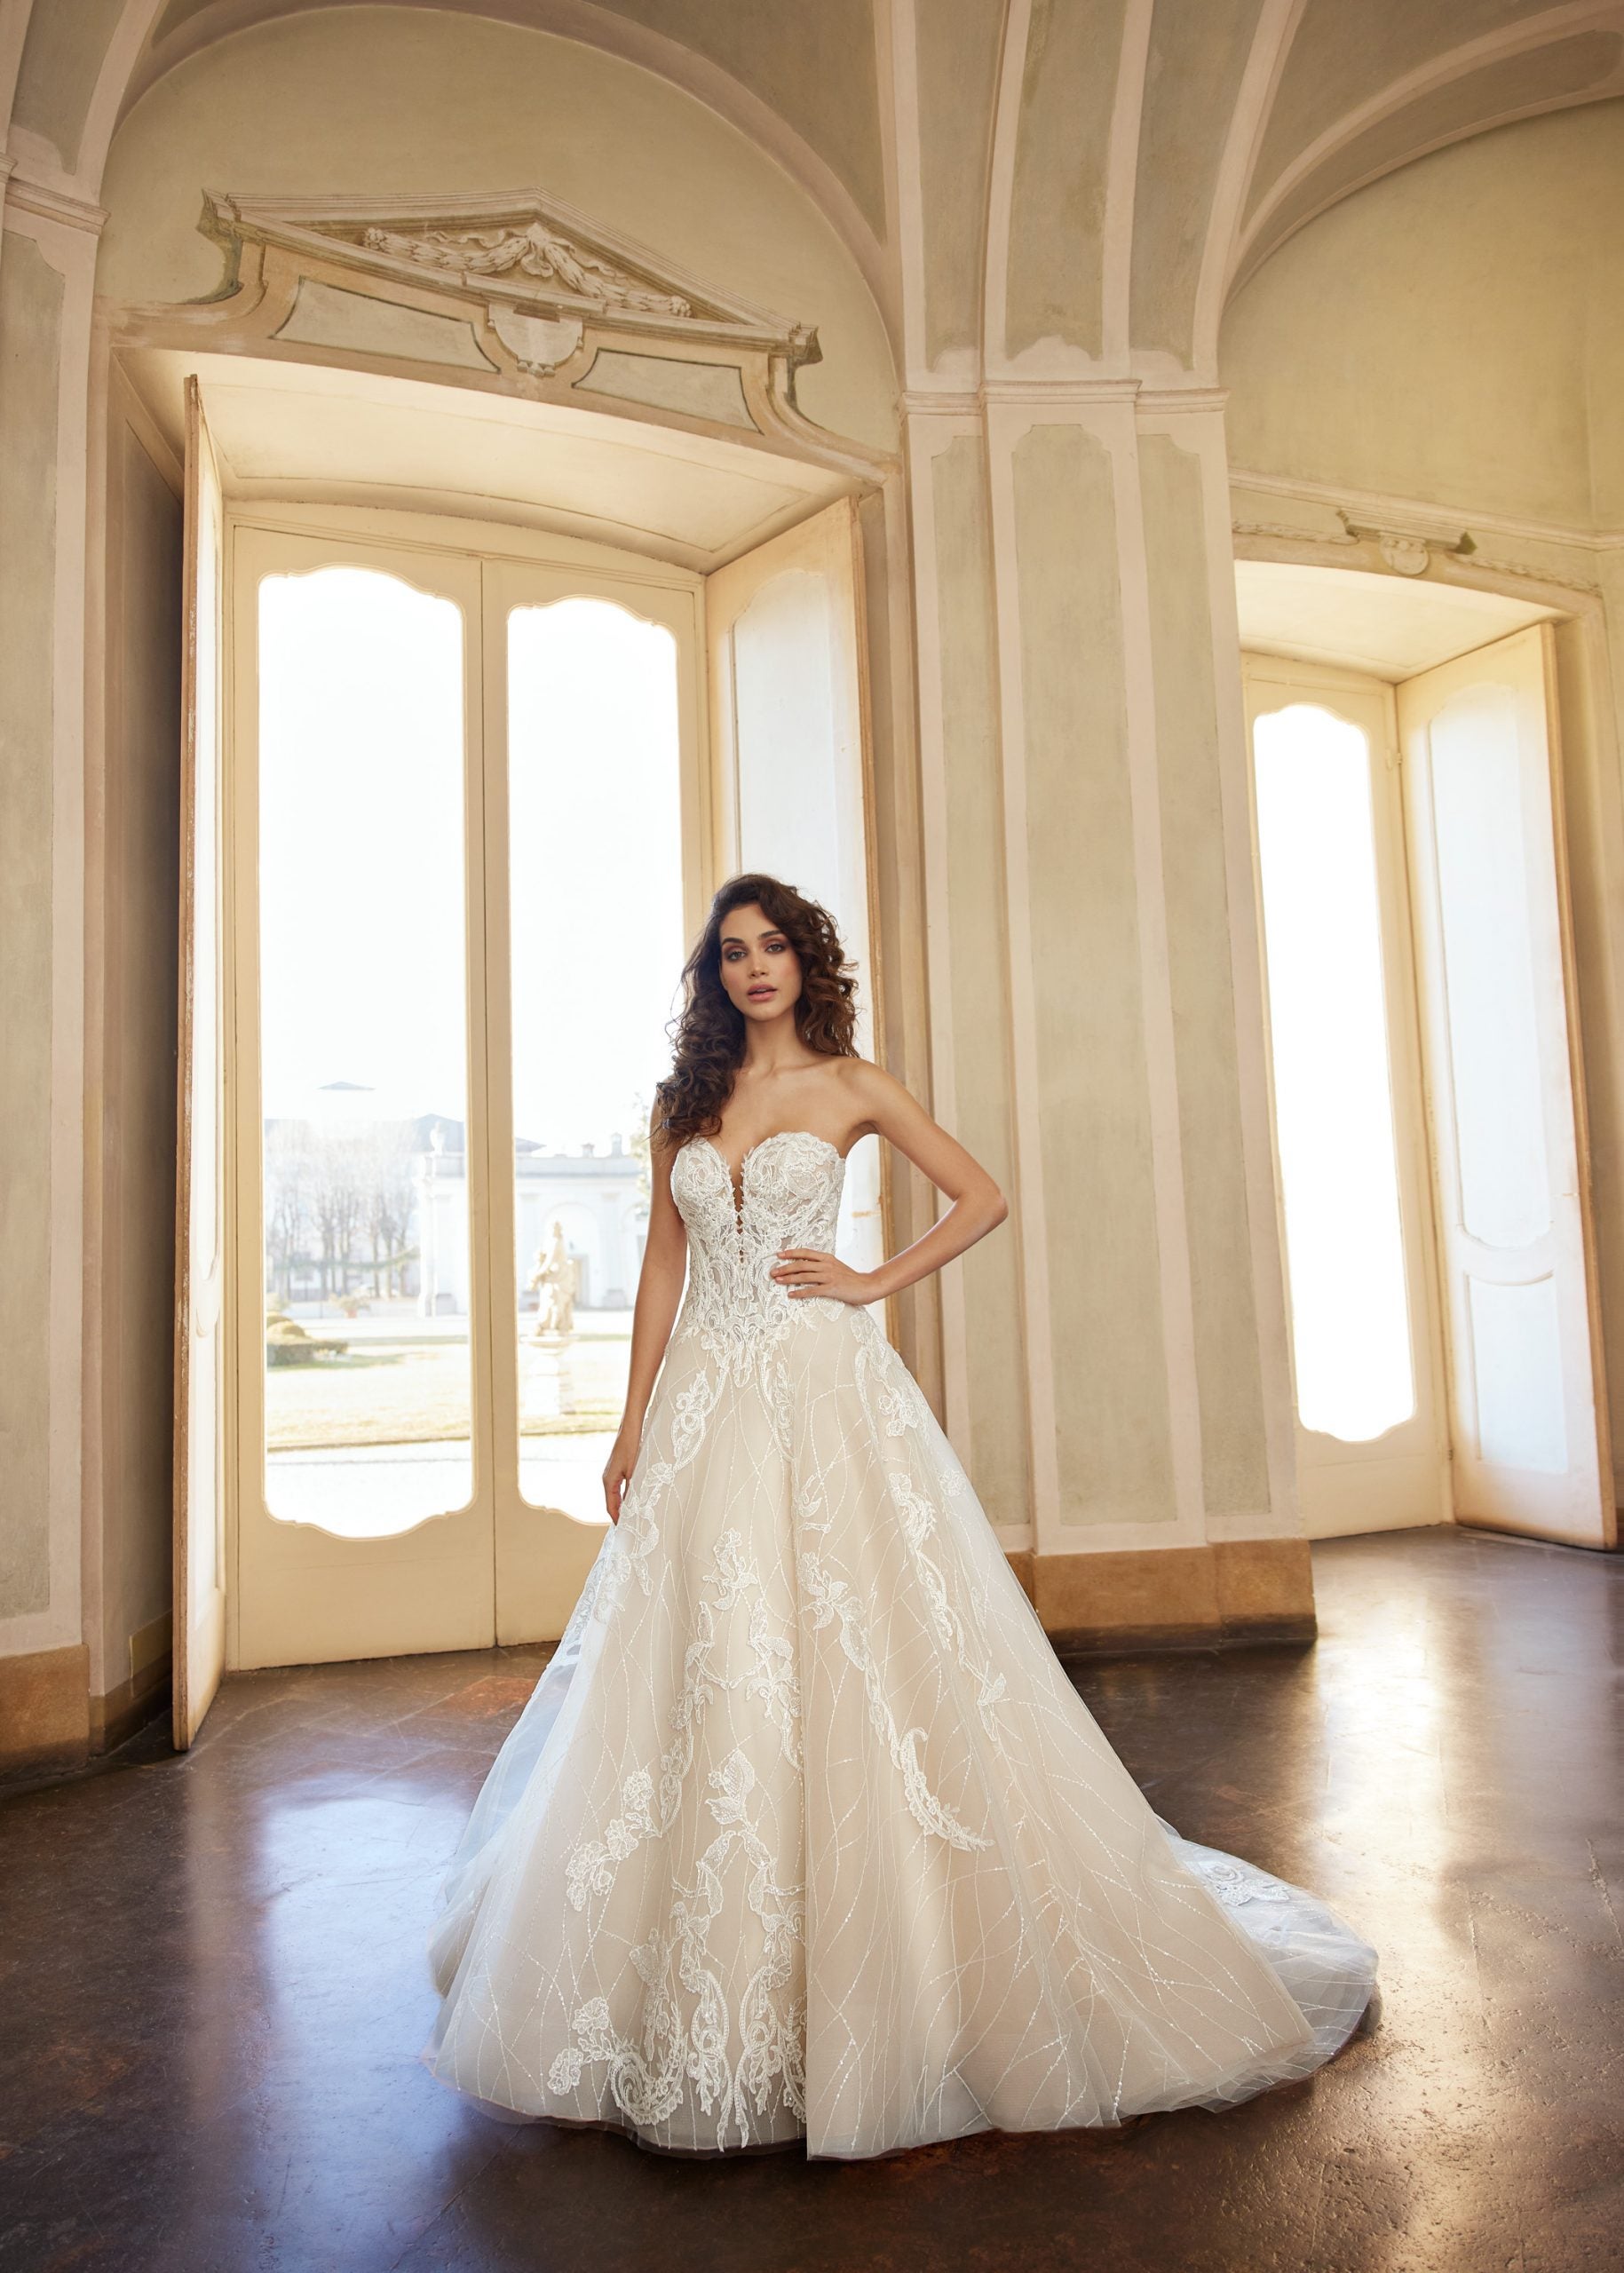 Strapless Ball Gown Wedding Dress With Lace Applique Throughout Kleinfeld  Bridal